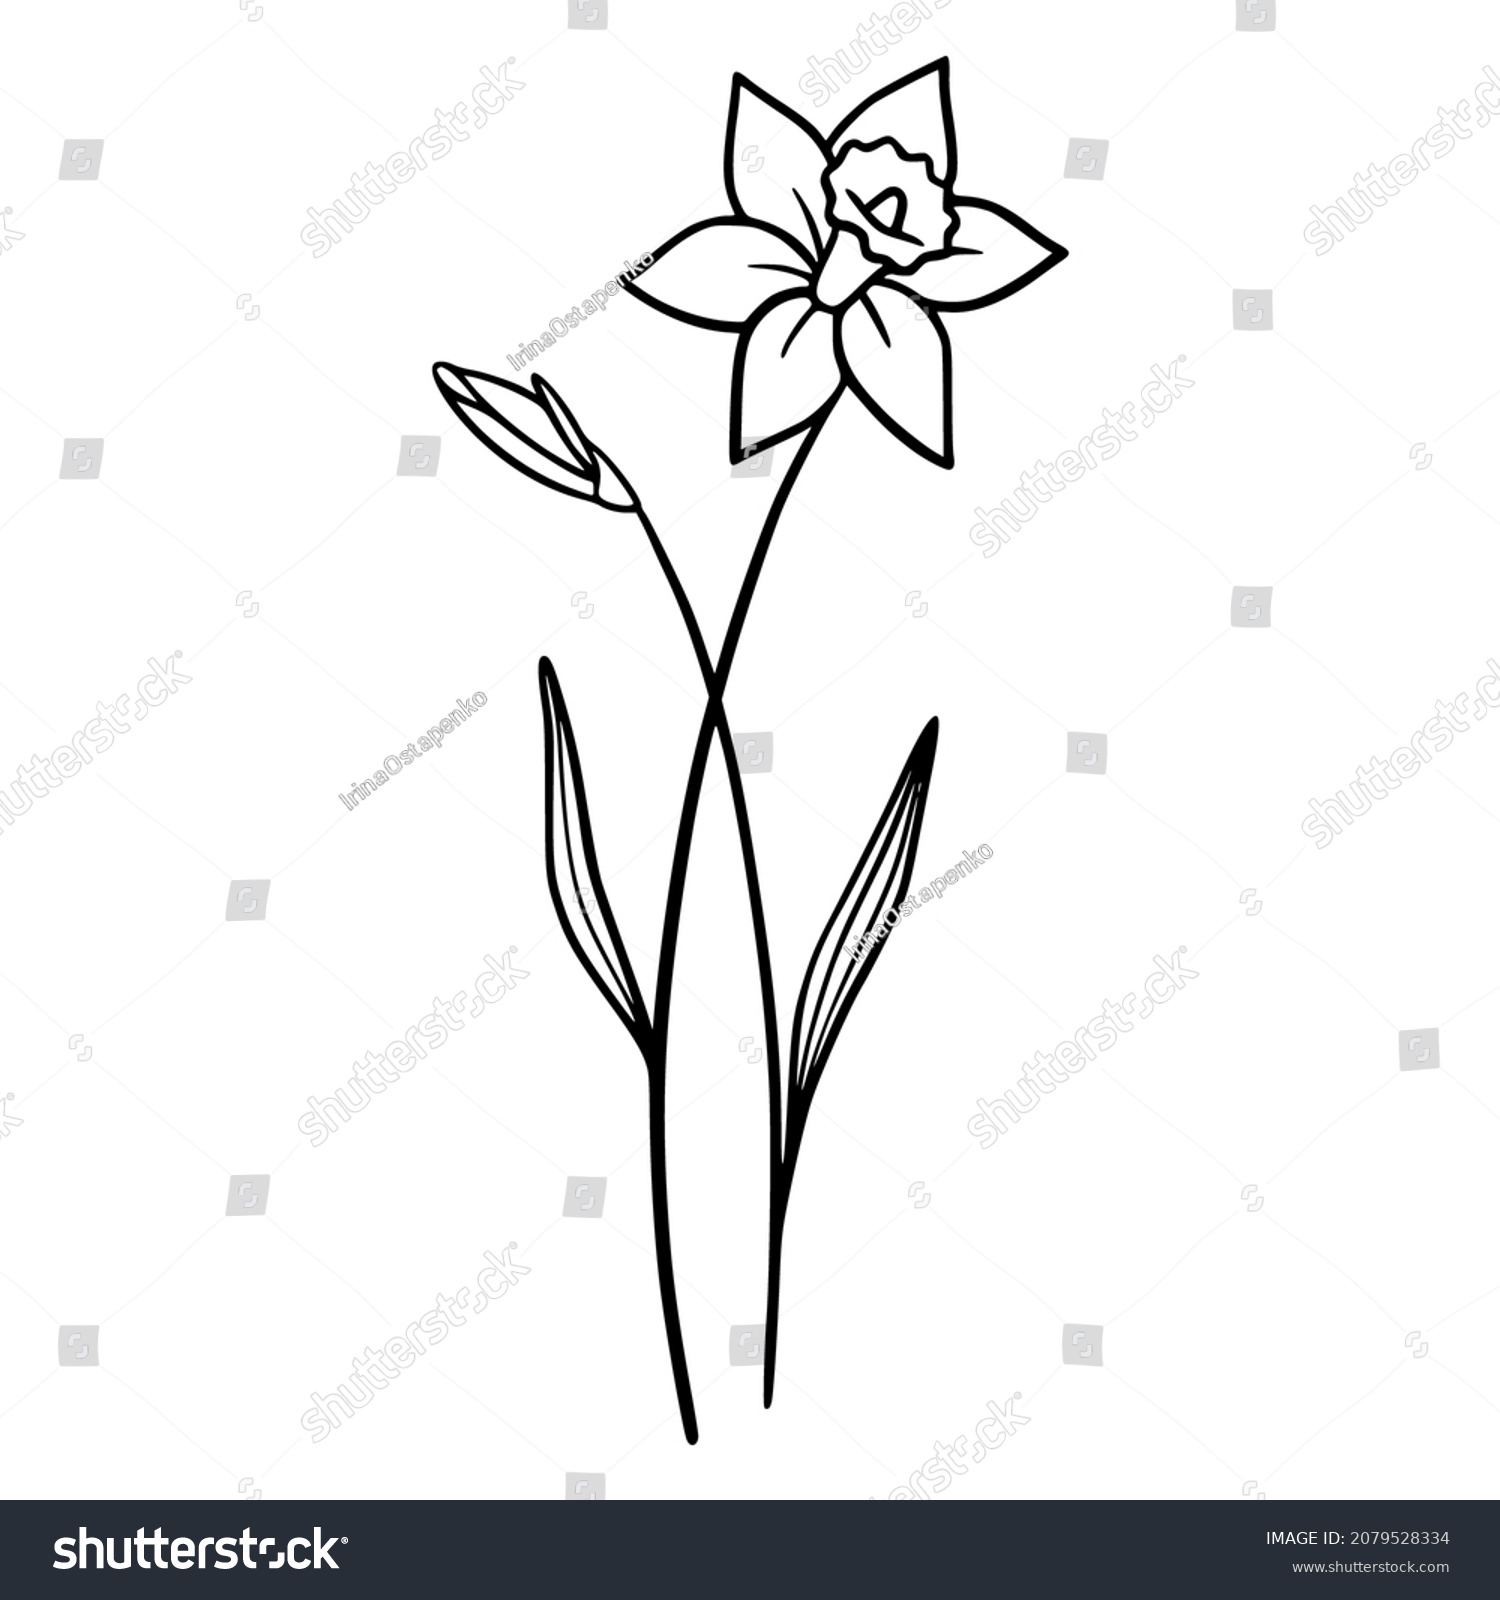 SVG of Daffodil flowers on white background. Hand-drawn illustration of a Daffodil flower. Drawing, line art, ink, vector. svg